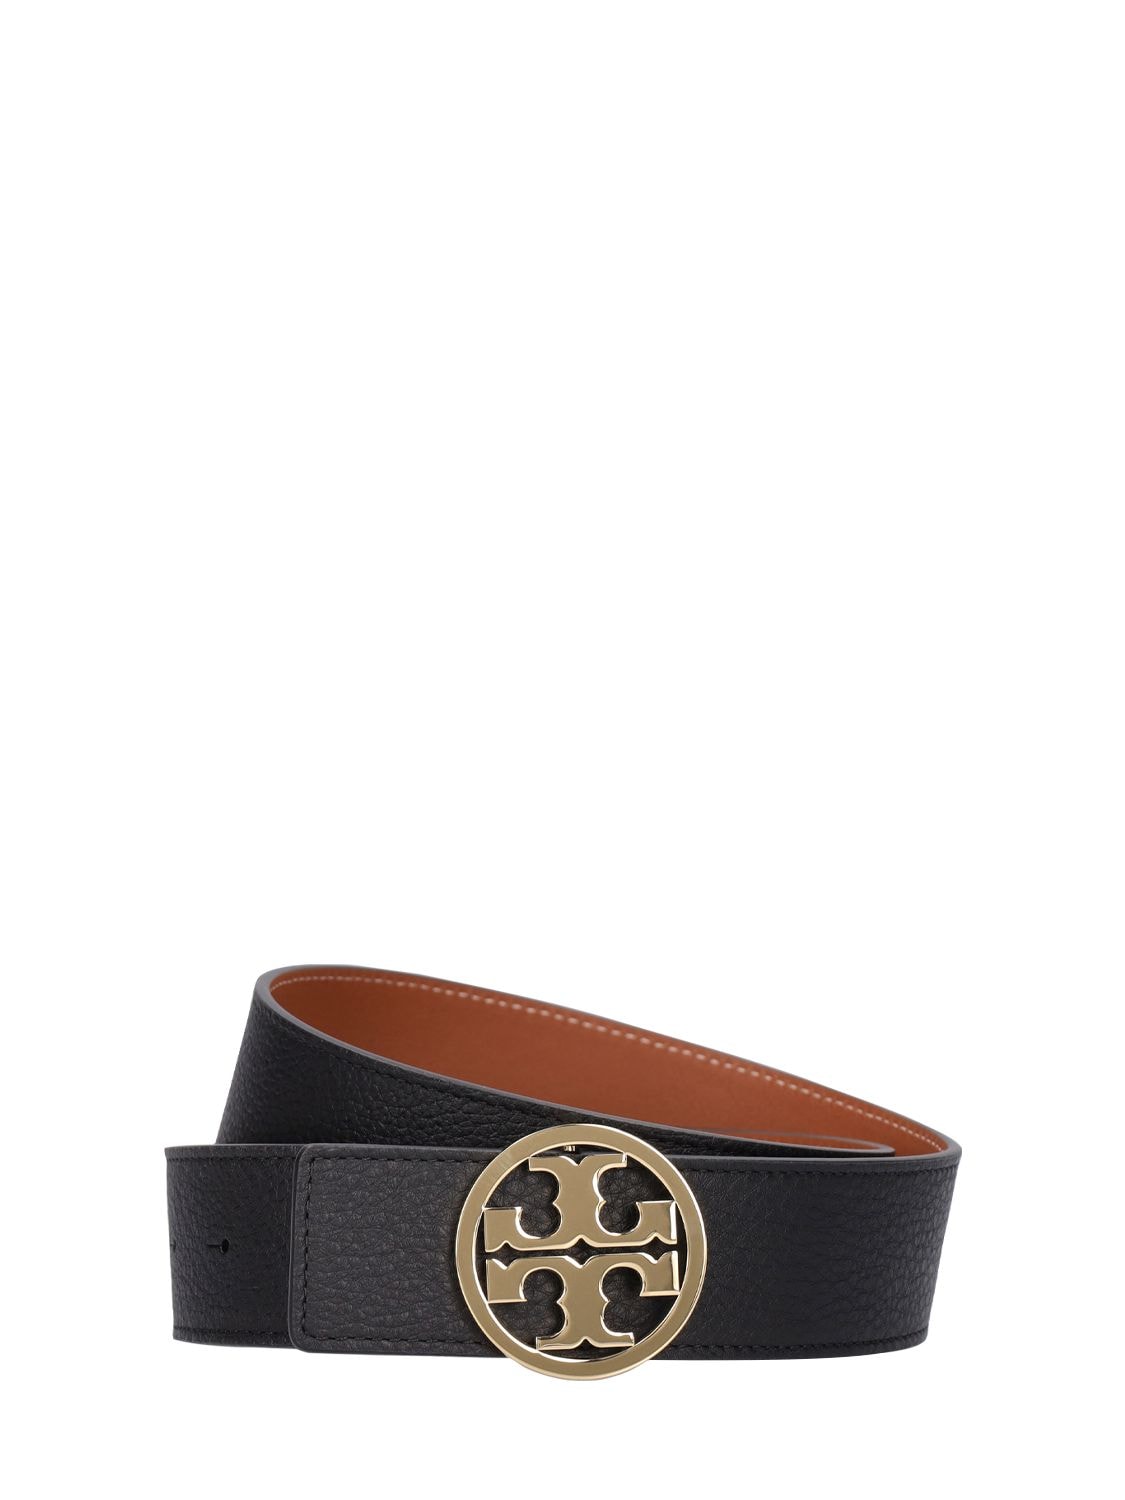 Tory Burch Miller Reversible Leather Belt In Black,classic